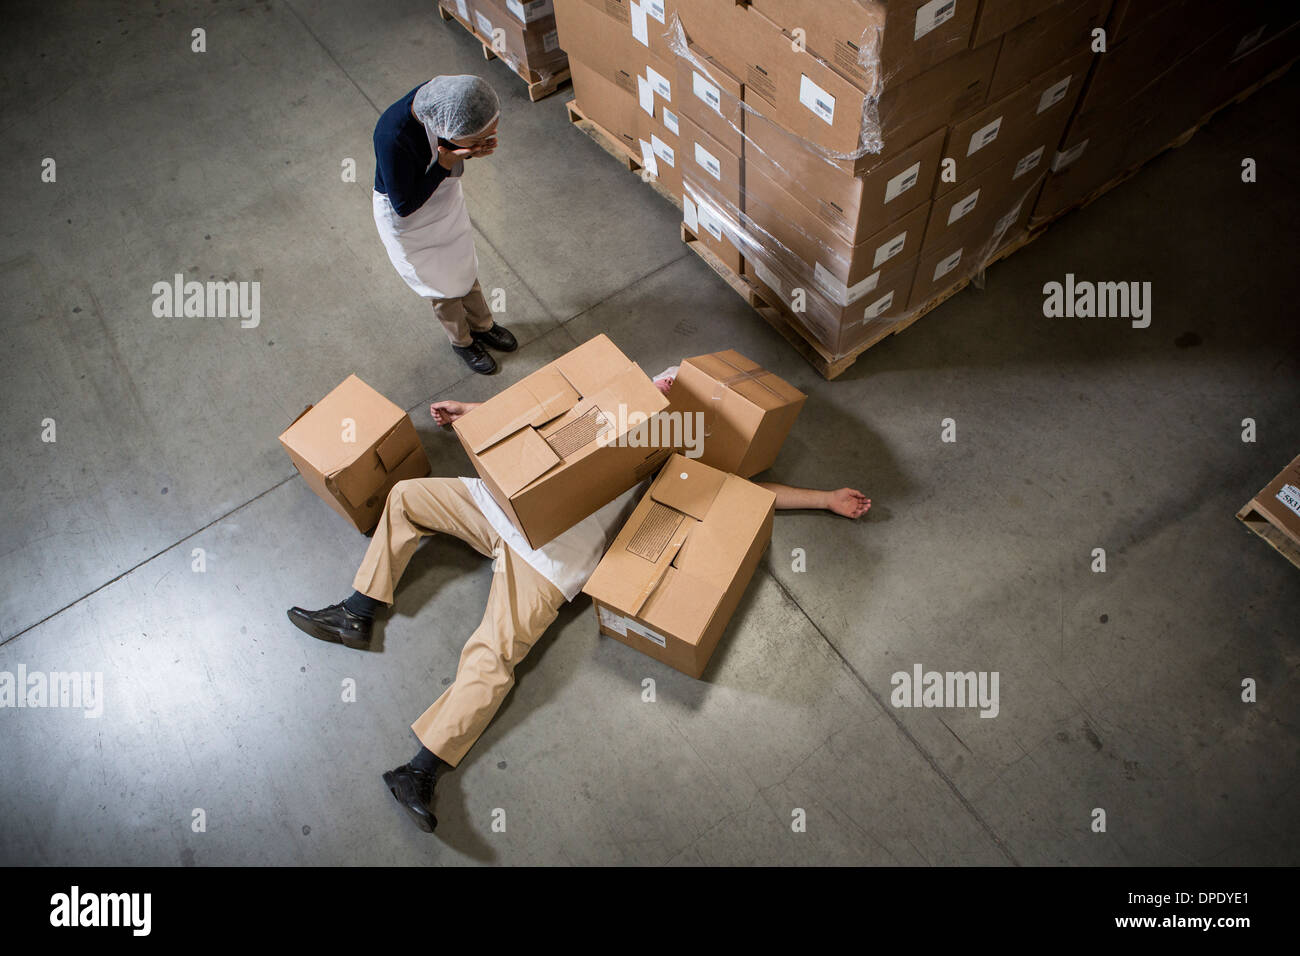 Woman looking at man lying on floor covered by cardboard boxes in warehouse Stock Photo